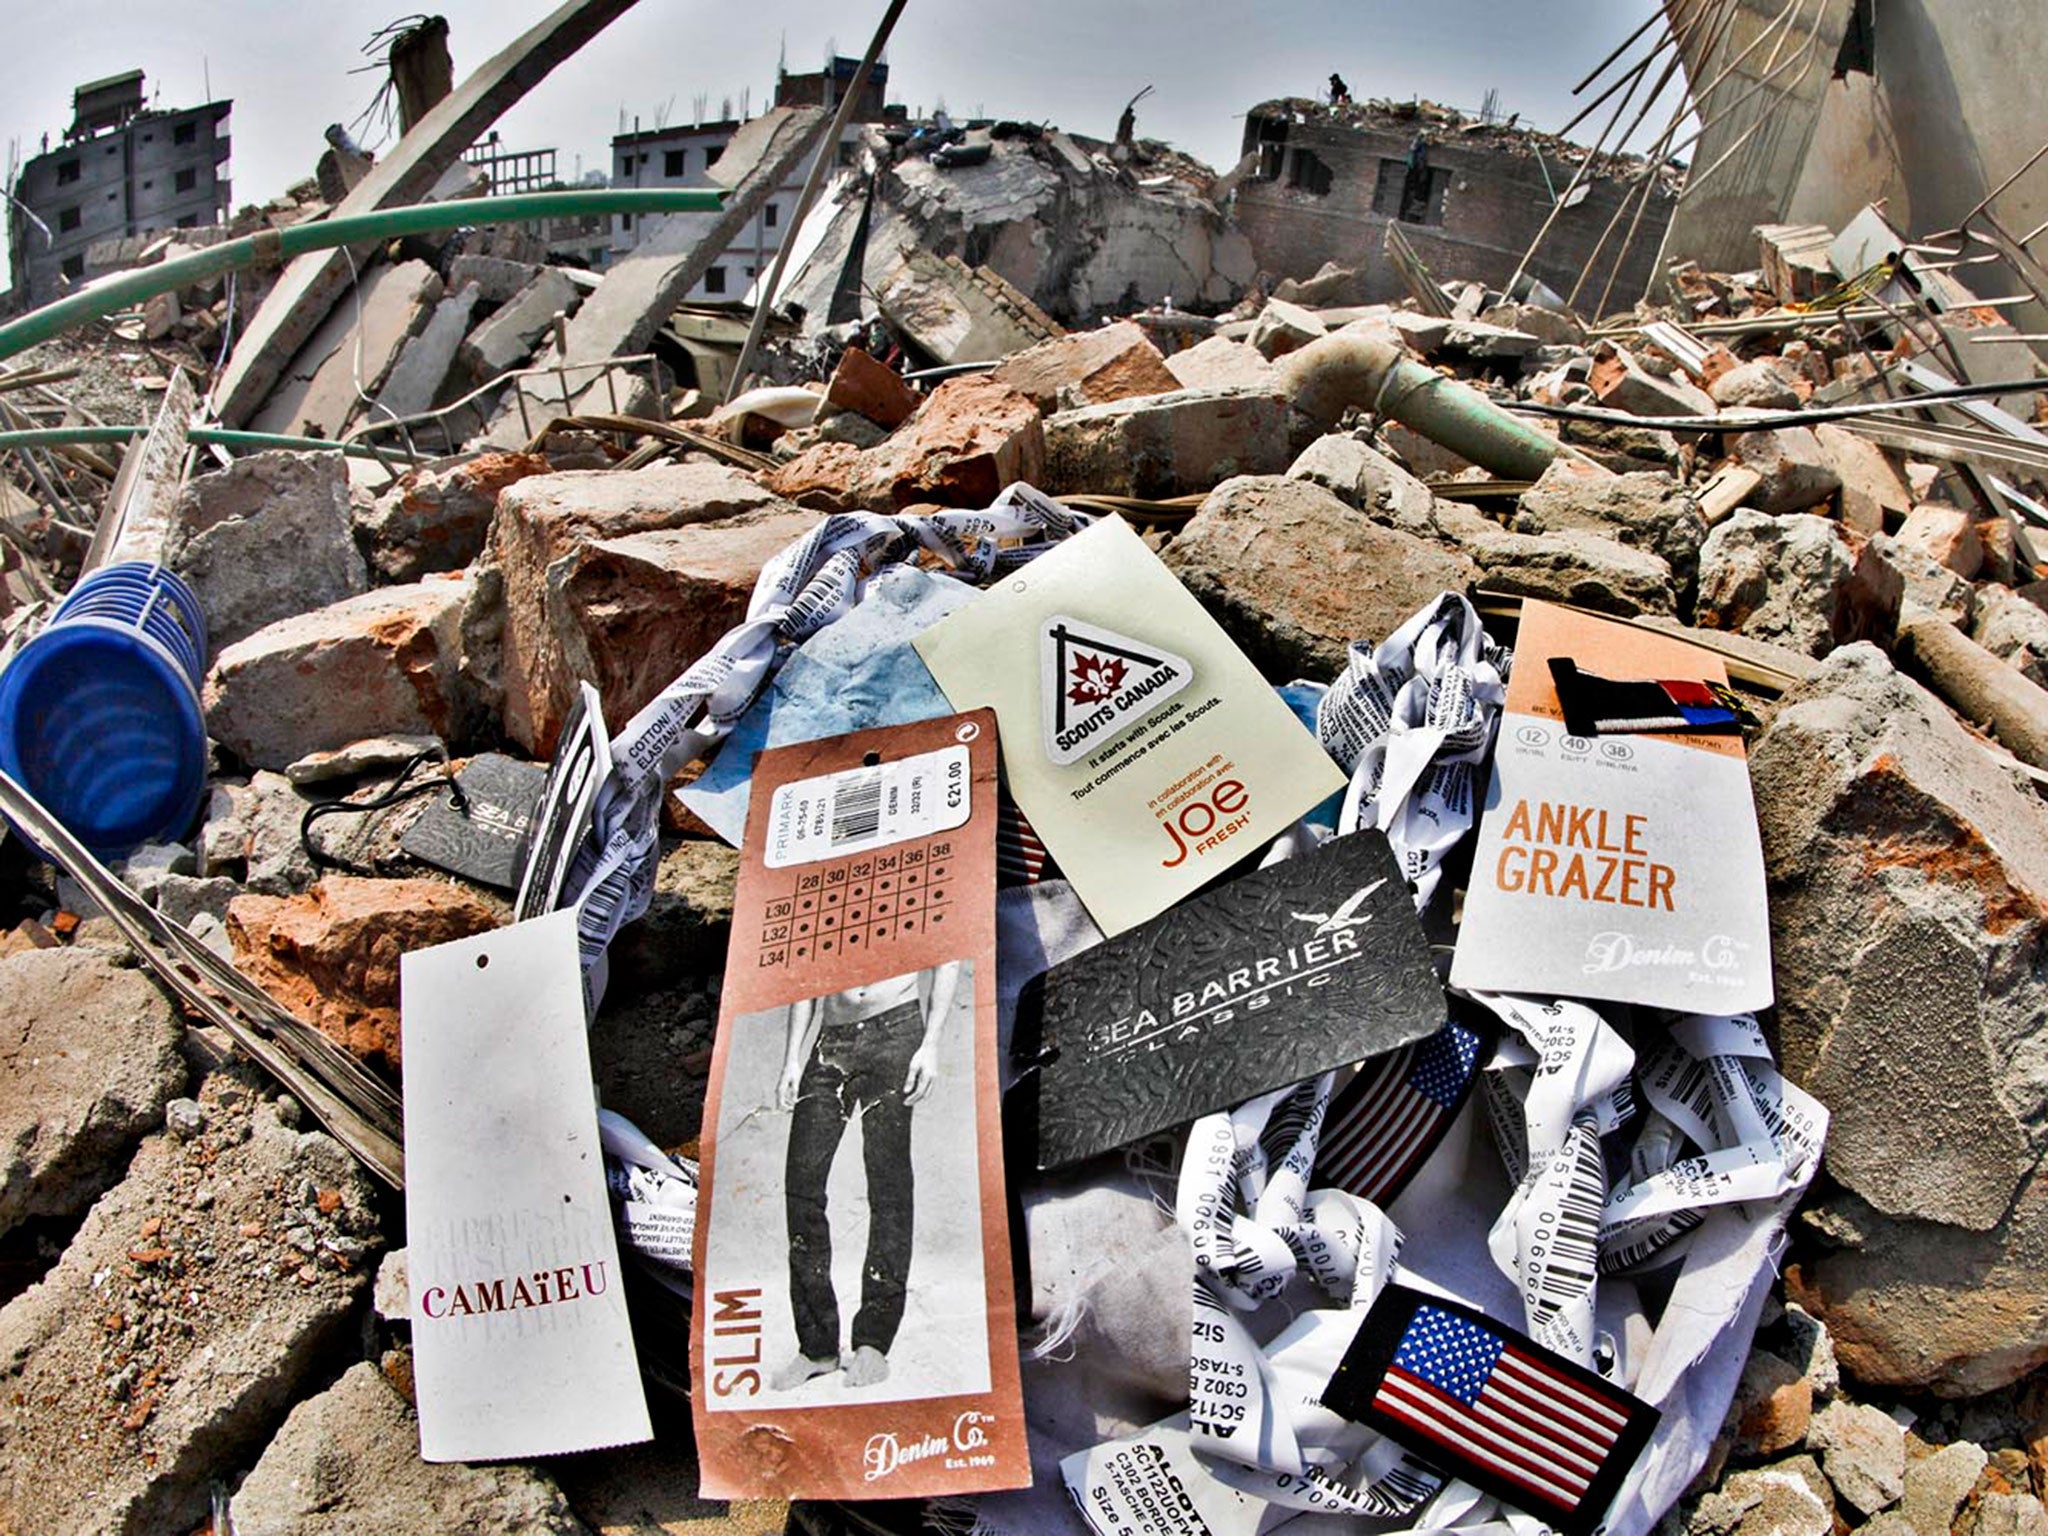 Many of brand tags left abandoned at the site of collapsed Rana Plaza building in Savar, Dhaka © Rashed Shumon